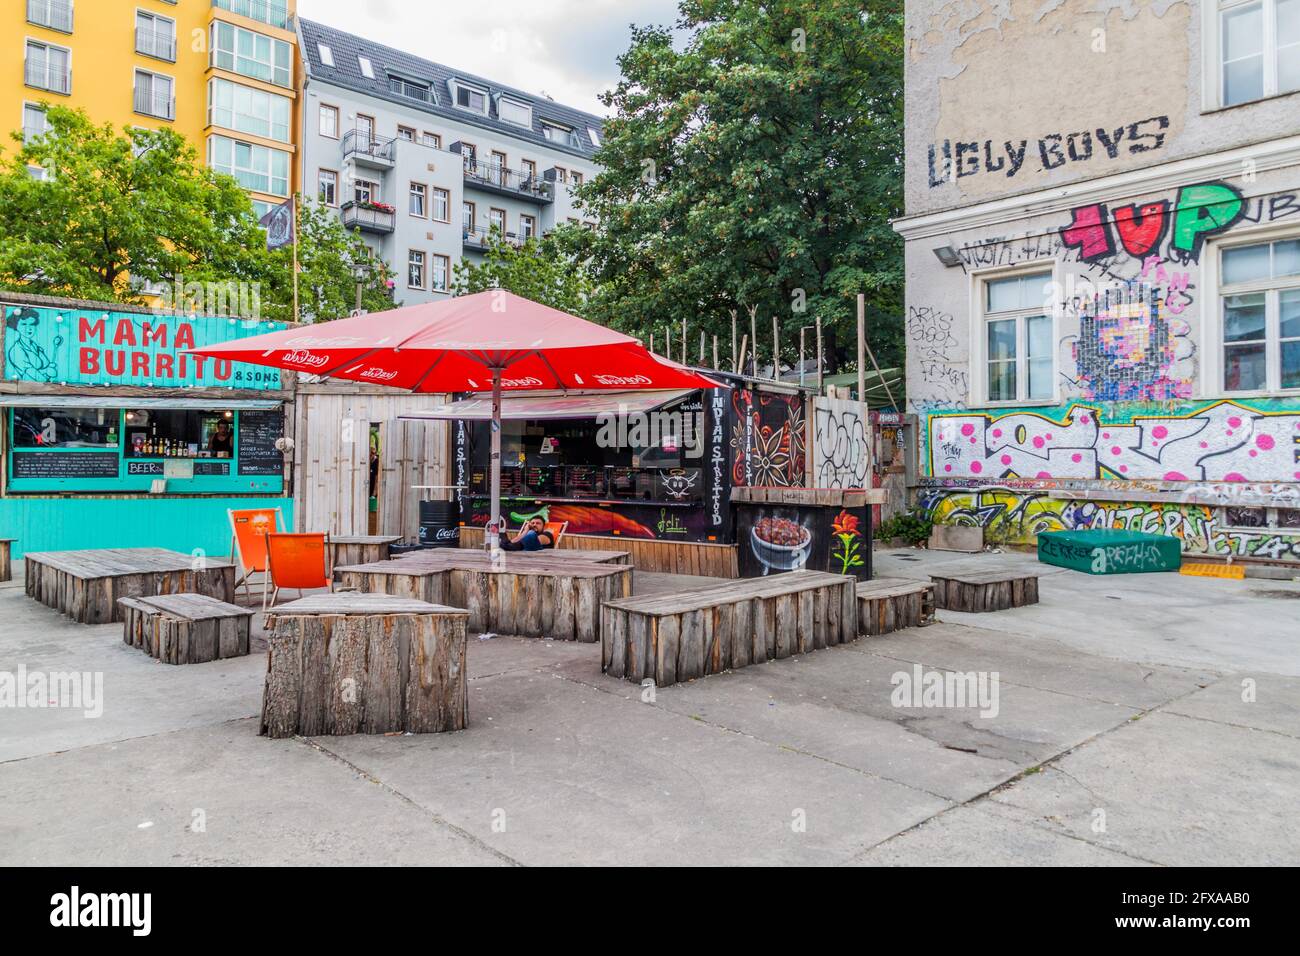 BERLIN, GERMANY - SEPTEMBER 1, 2017: Several street food stalls in RAW Gelande subcultural compound in Berlin. Stock Photo